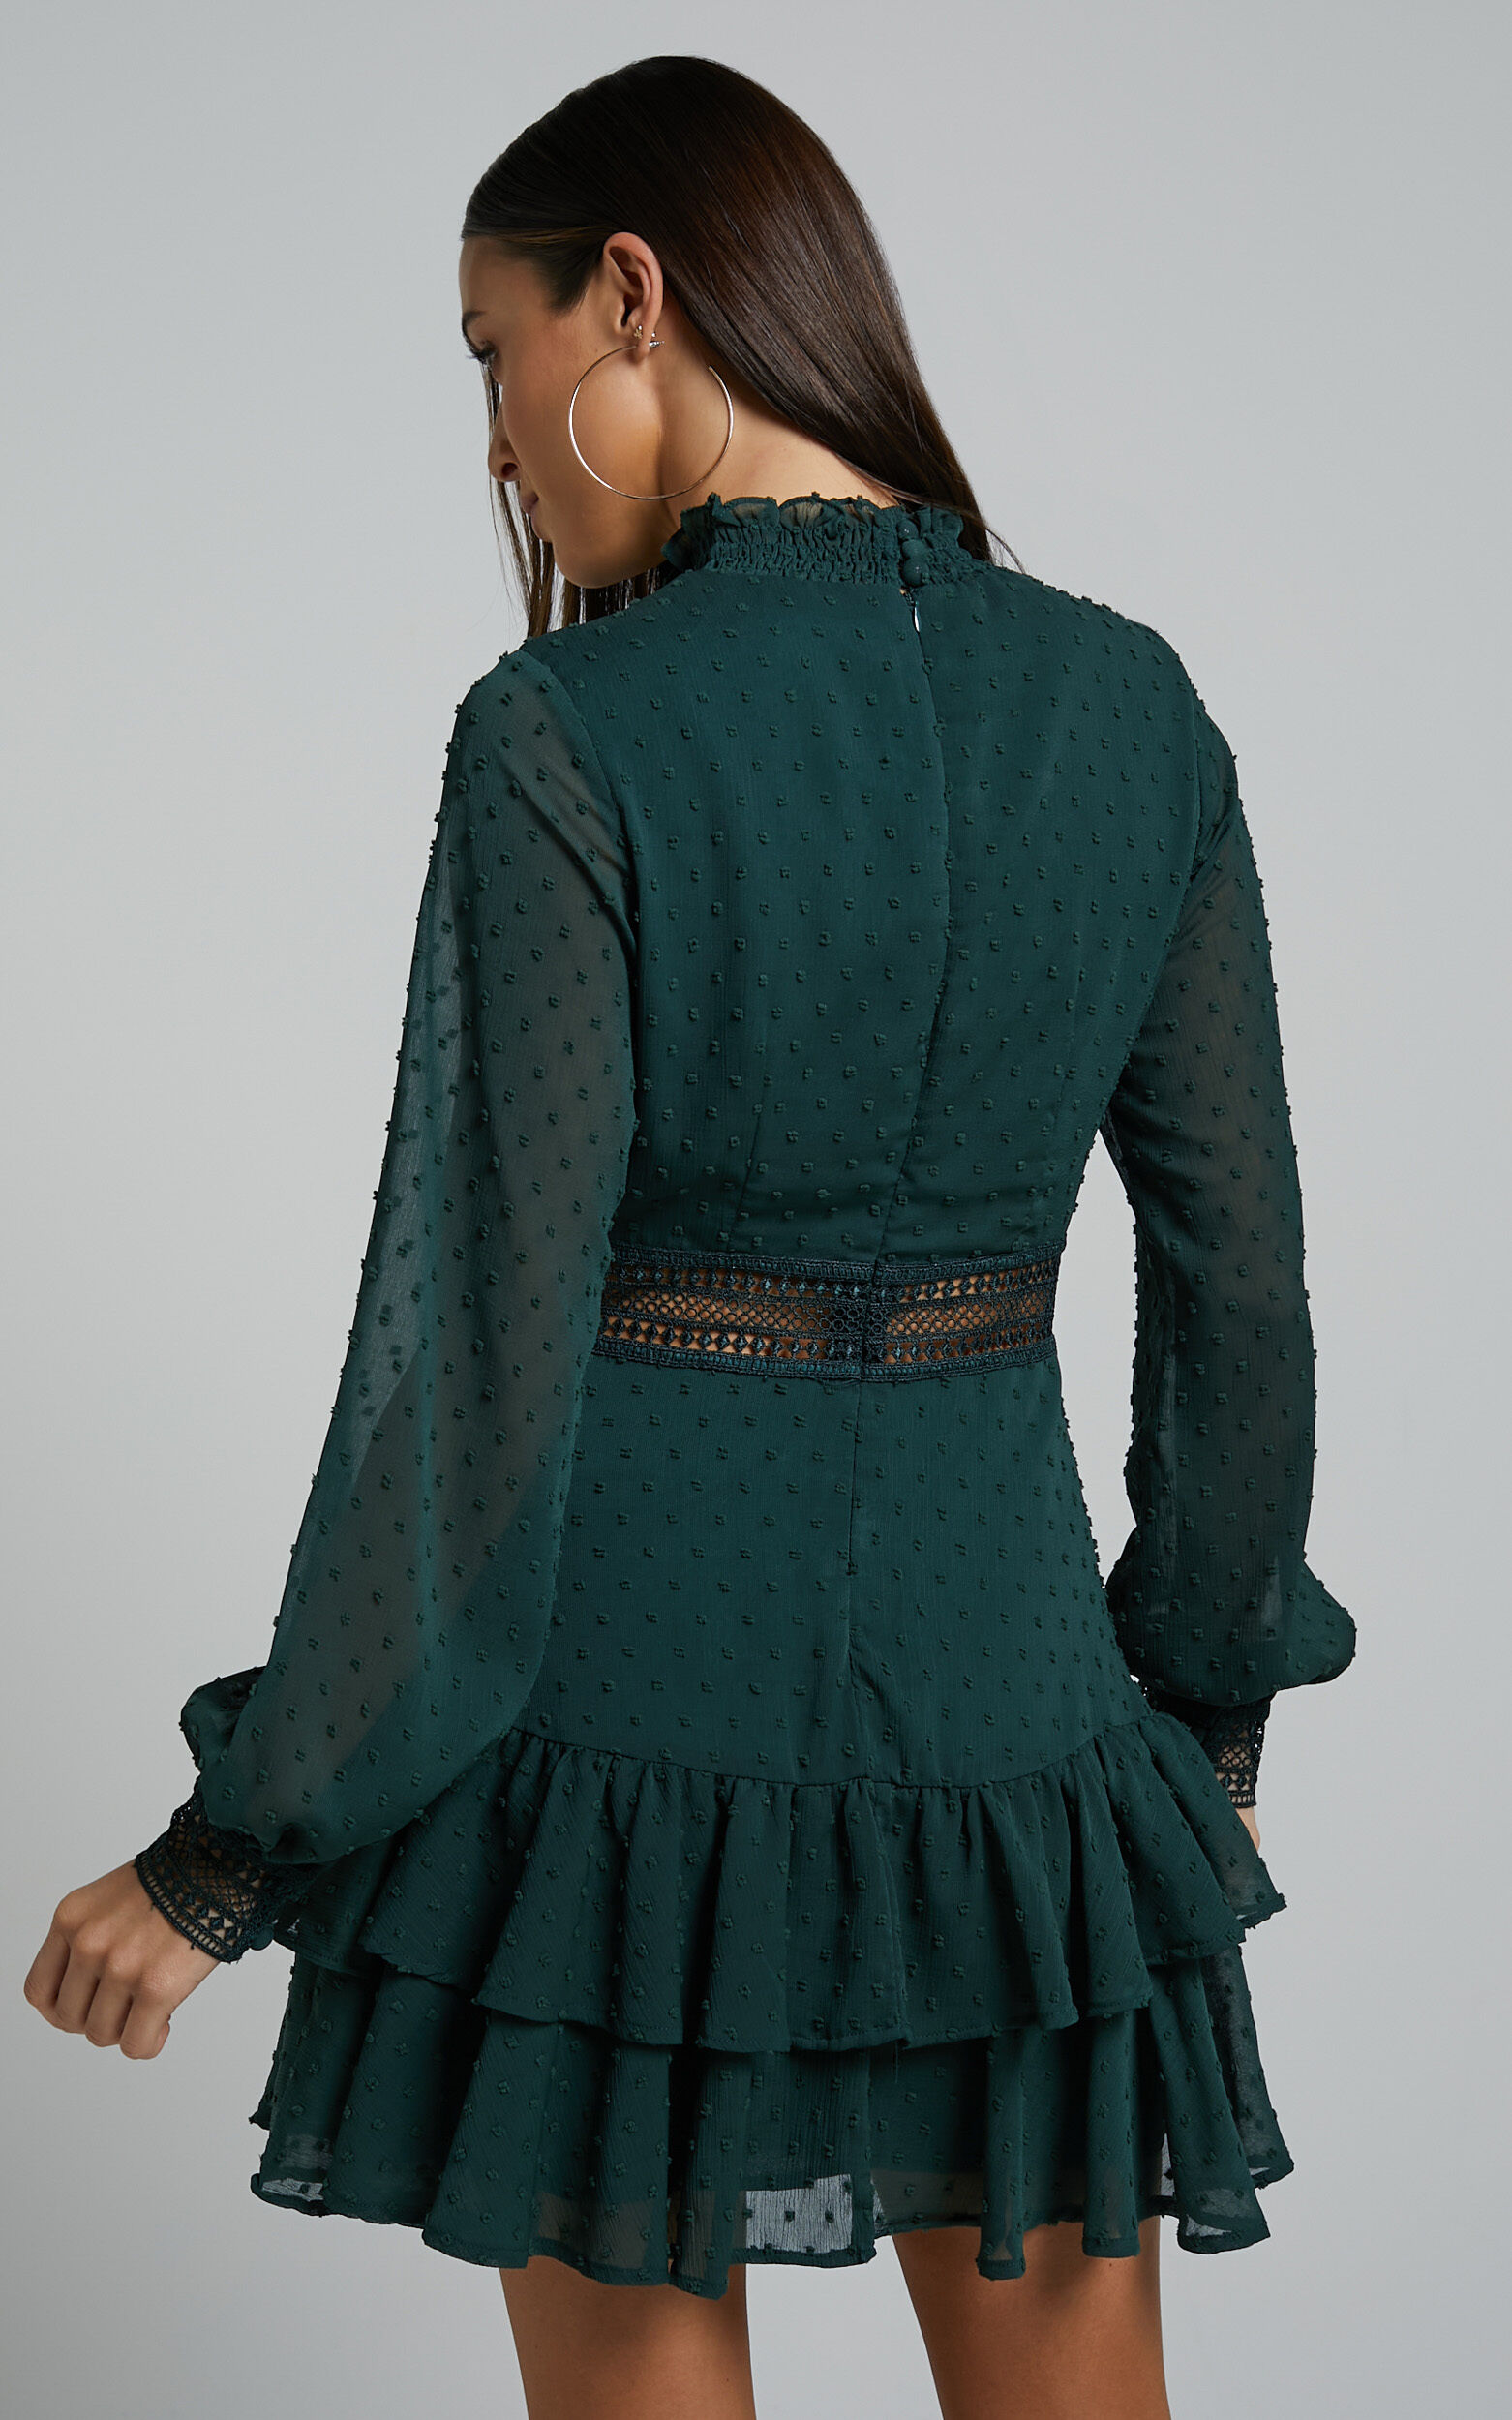 Are You Gonna Kiss Me Long Sleeve Mini Dress in Emerald - 04, GRN4, super-hi-res image number null